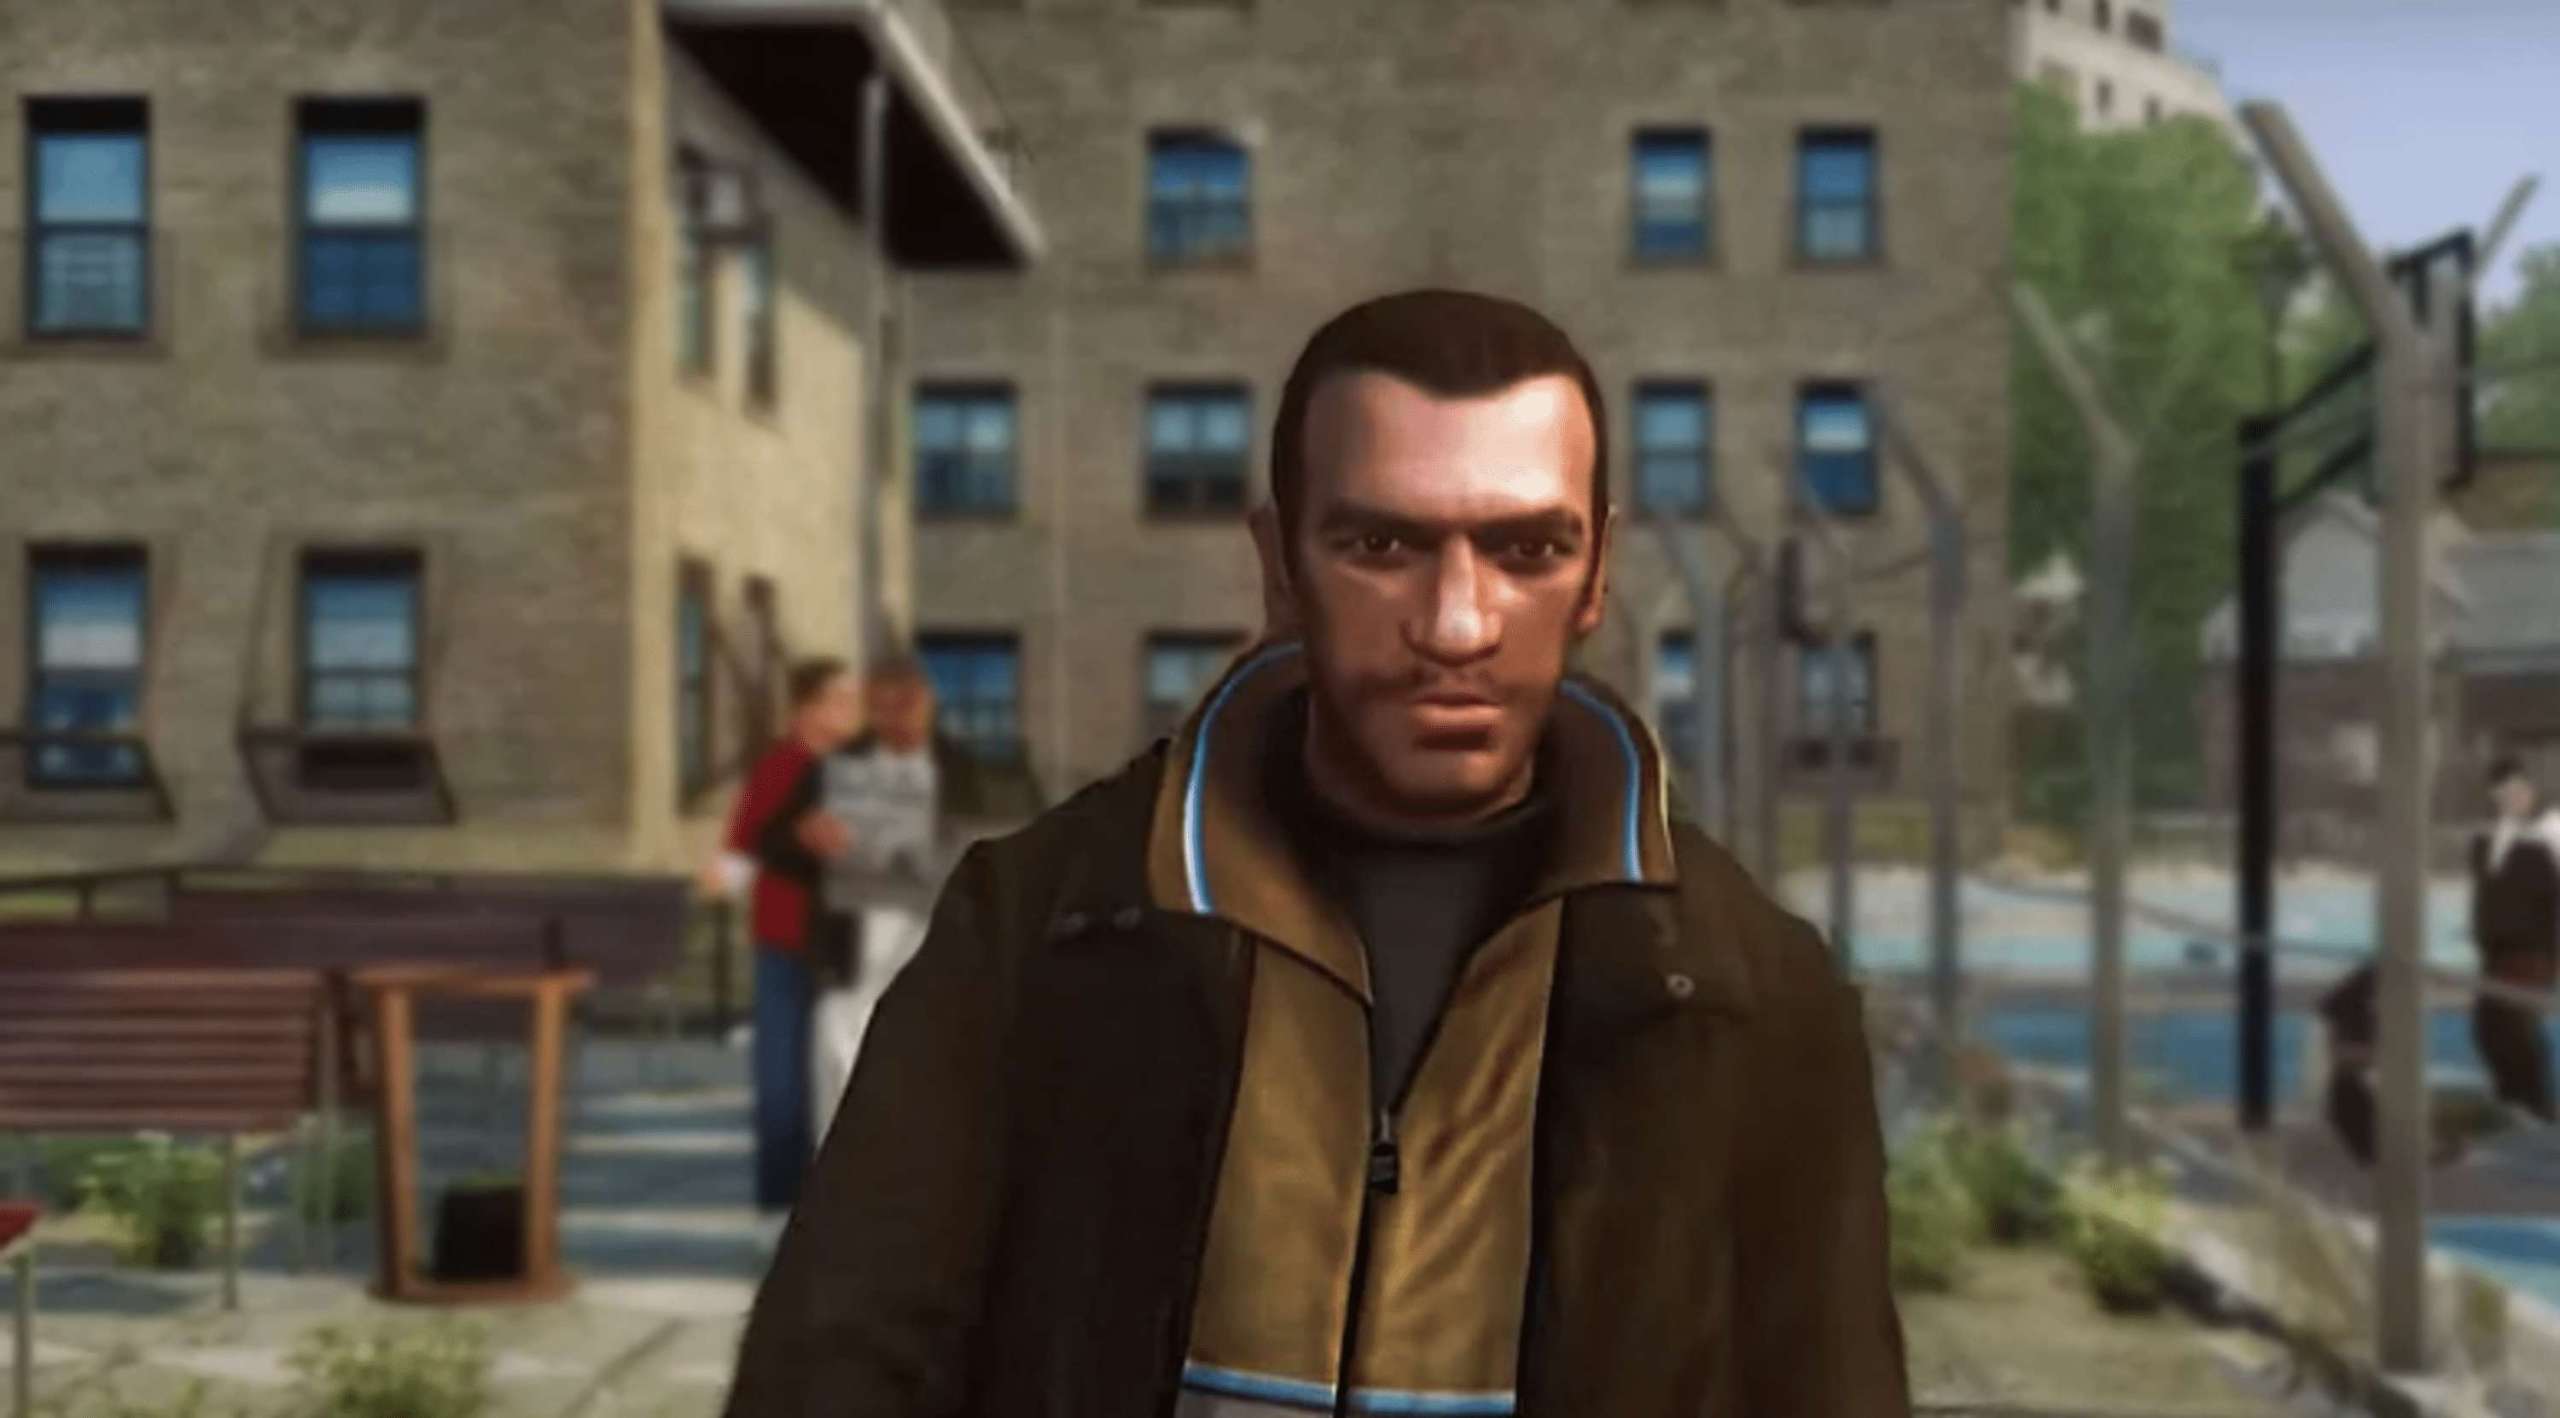 Takedown Notices For The Grand Theft Auto 4 Definitive Edition Project Have Been Sent By Rockstar